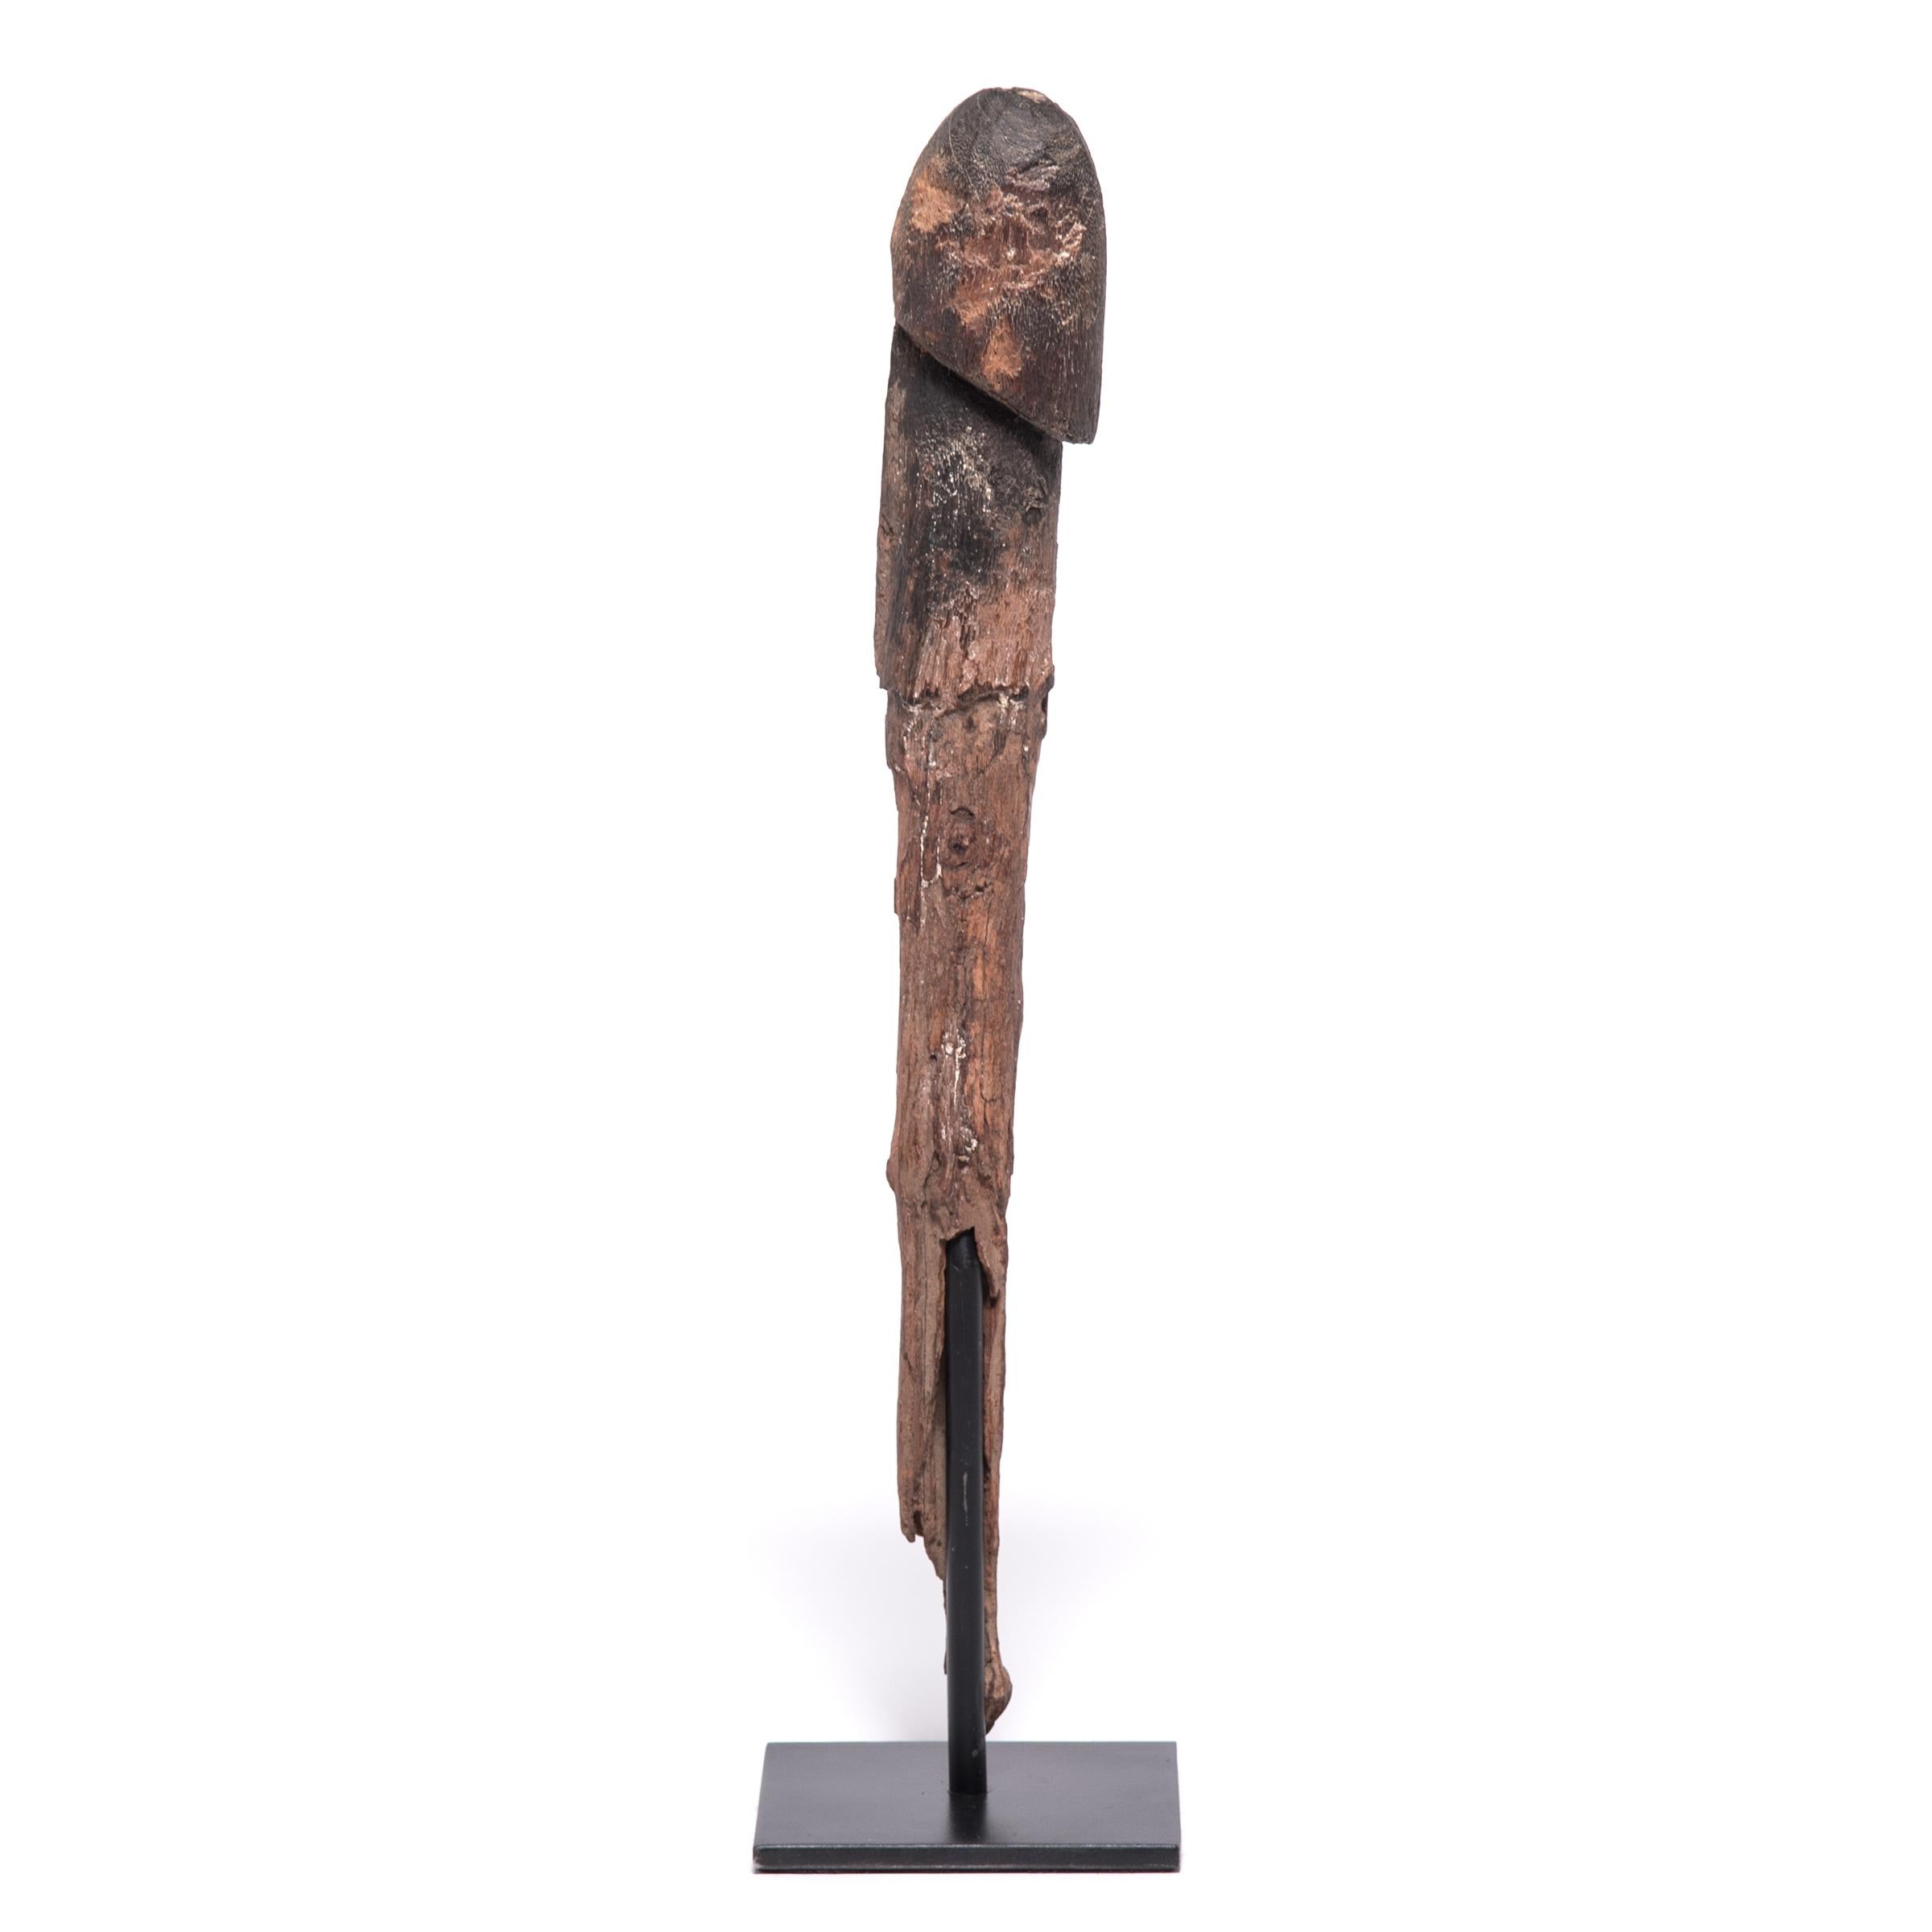 Intended to ensure fertility and bountiful harvests, this carved-wood phallus is called a legba and was among many buried outside dwellings and in the fields of the Fon people of West Africa. These carvings are named after Legba, the trickster son